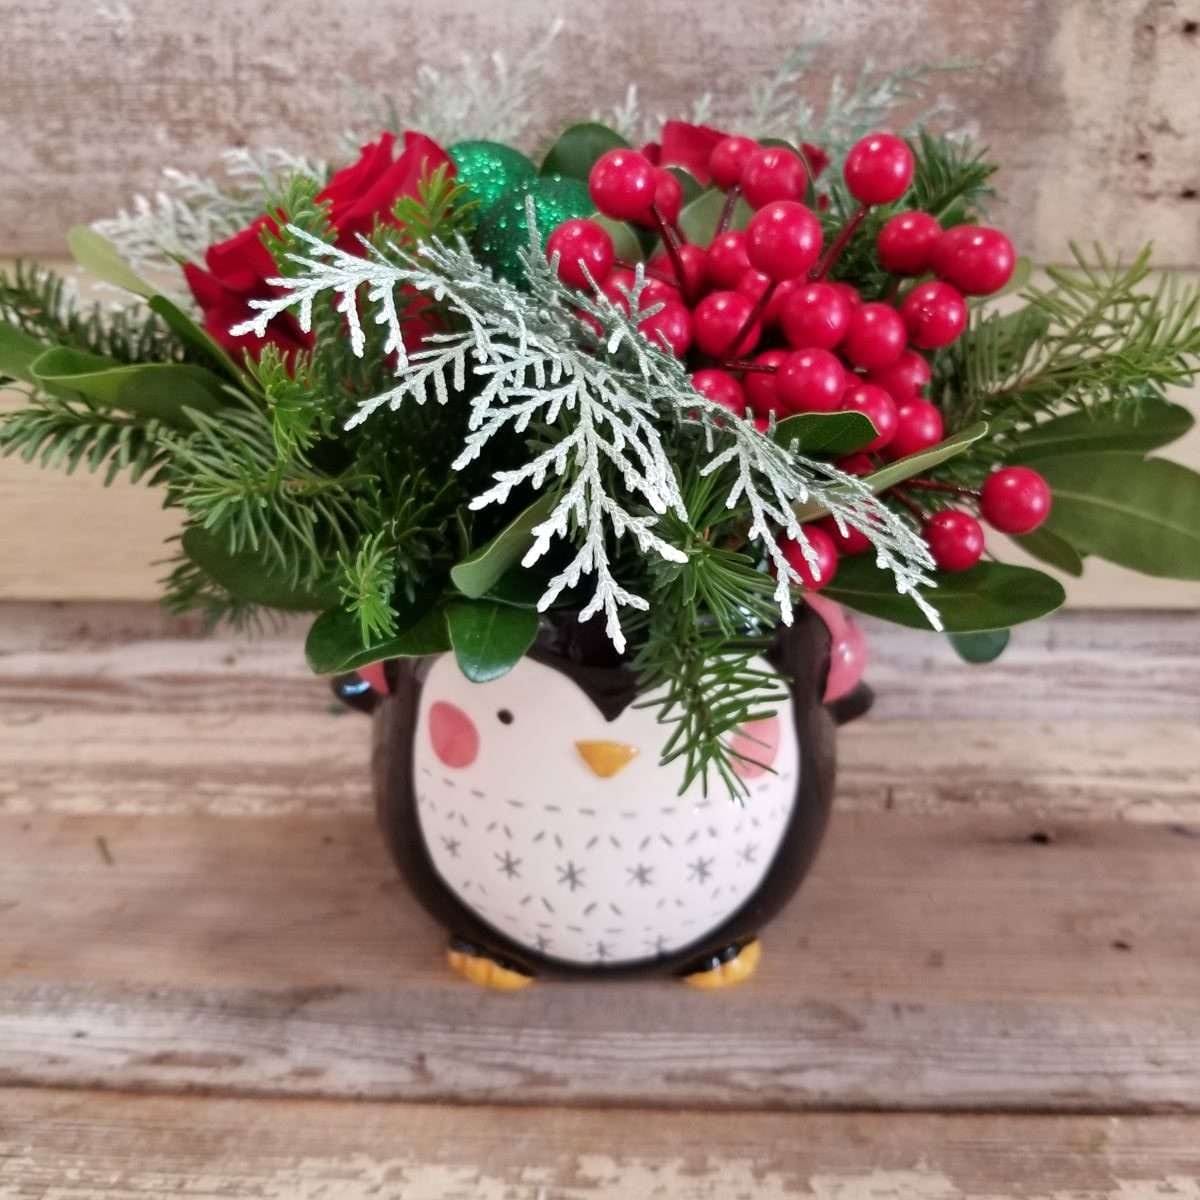 Winter and Christmas Flower arrangement in a pengiun container